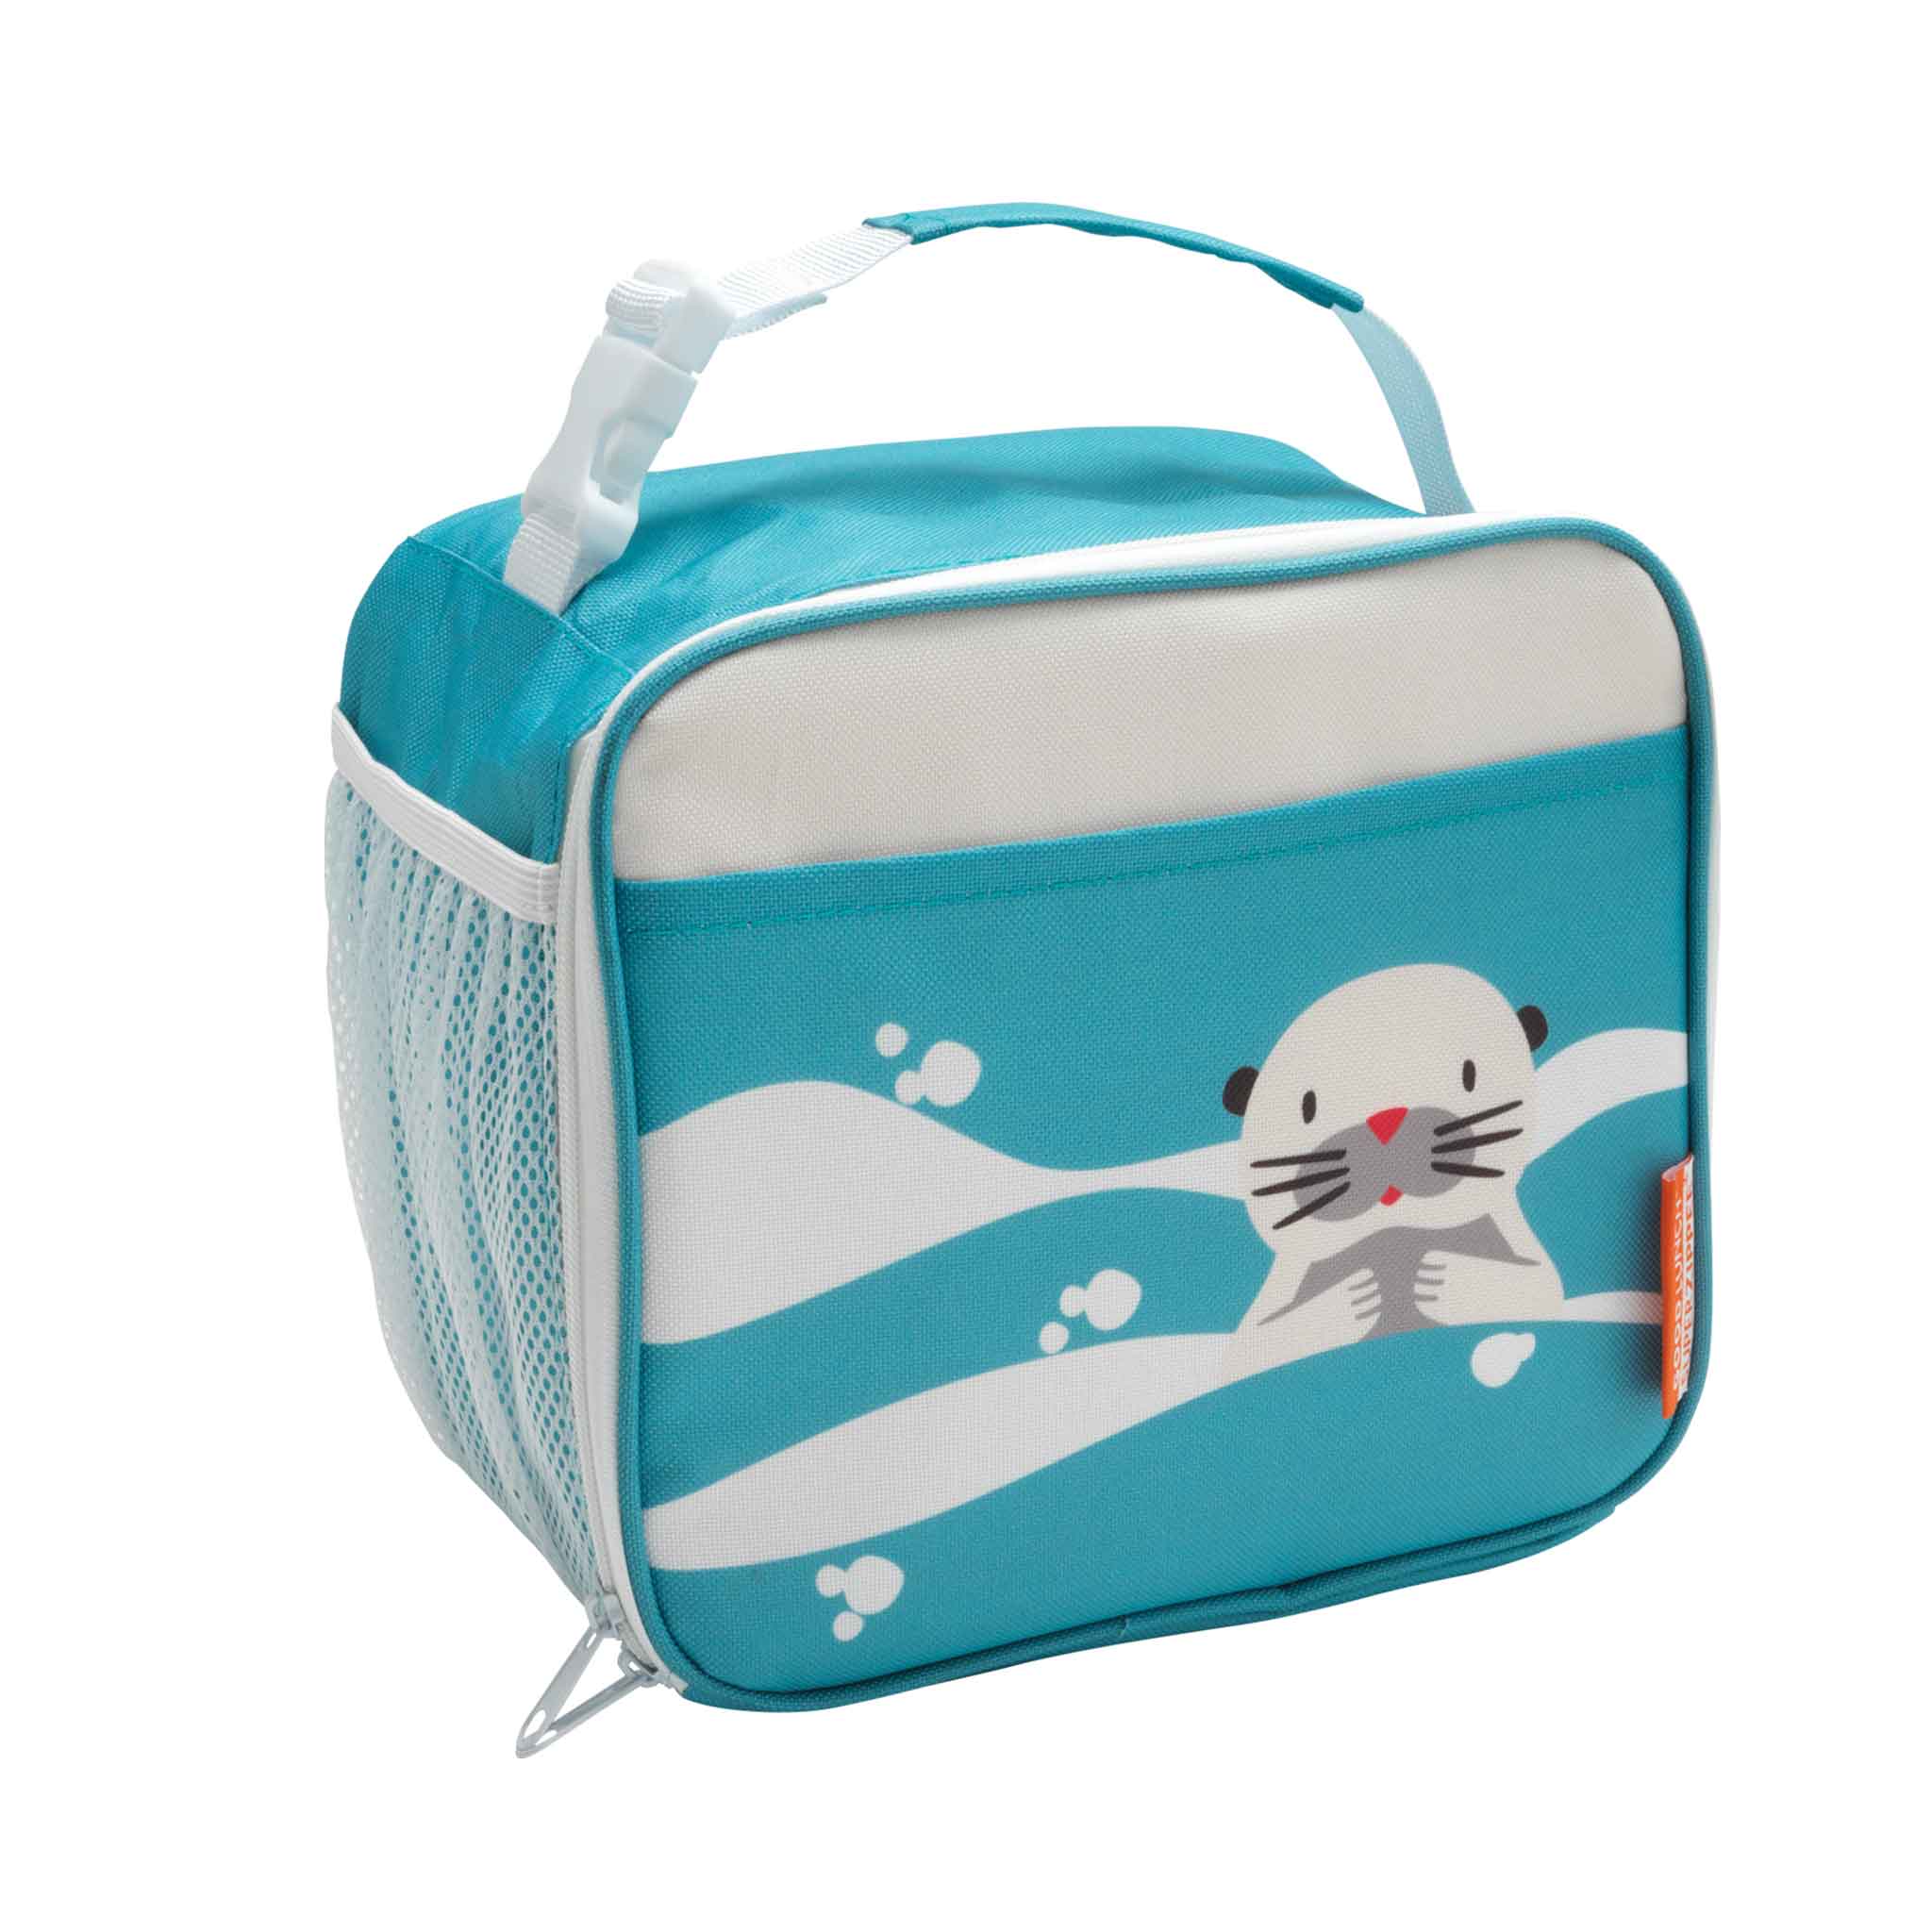 Sugarbooger by Ore’ Originals Super Zippee Lunch Tote | Baby Otter